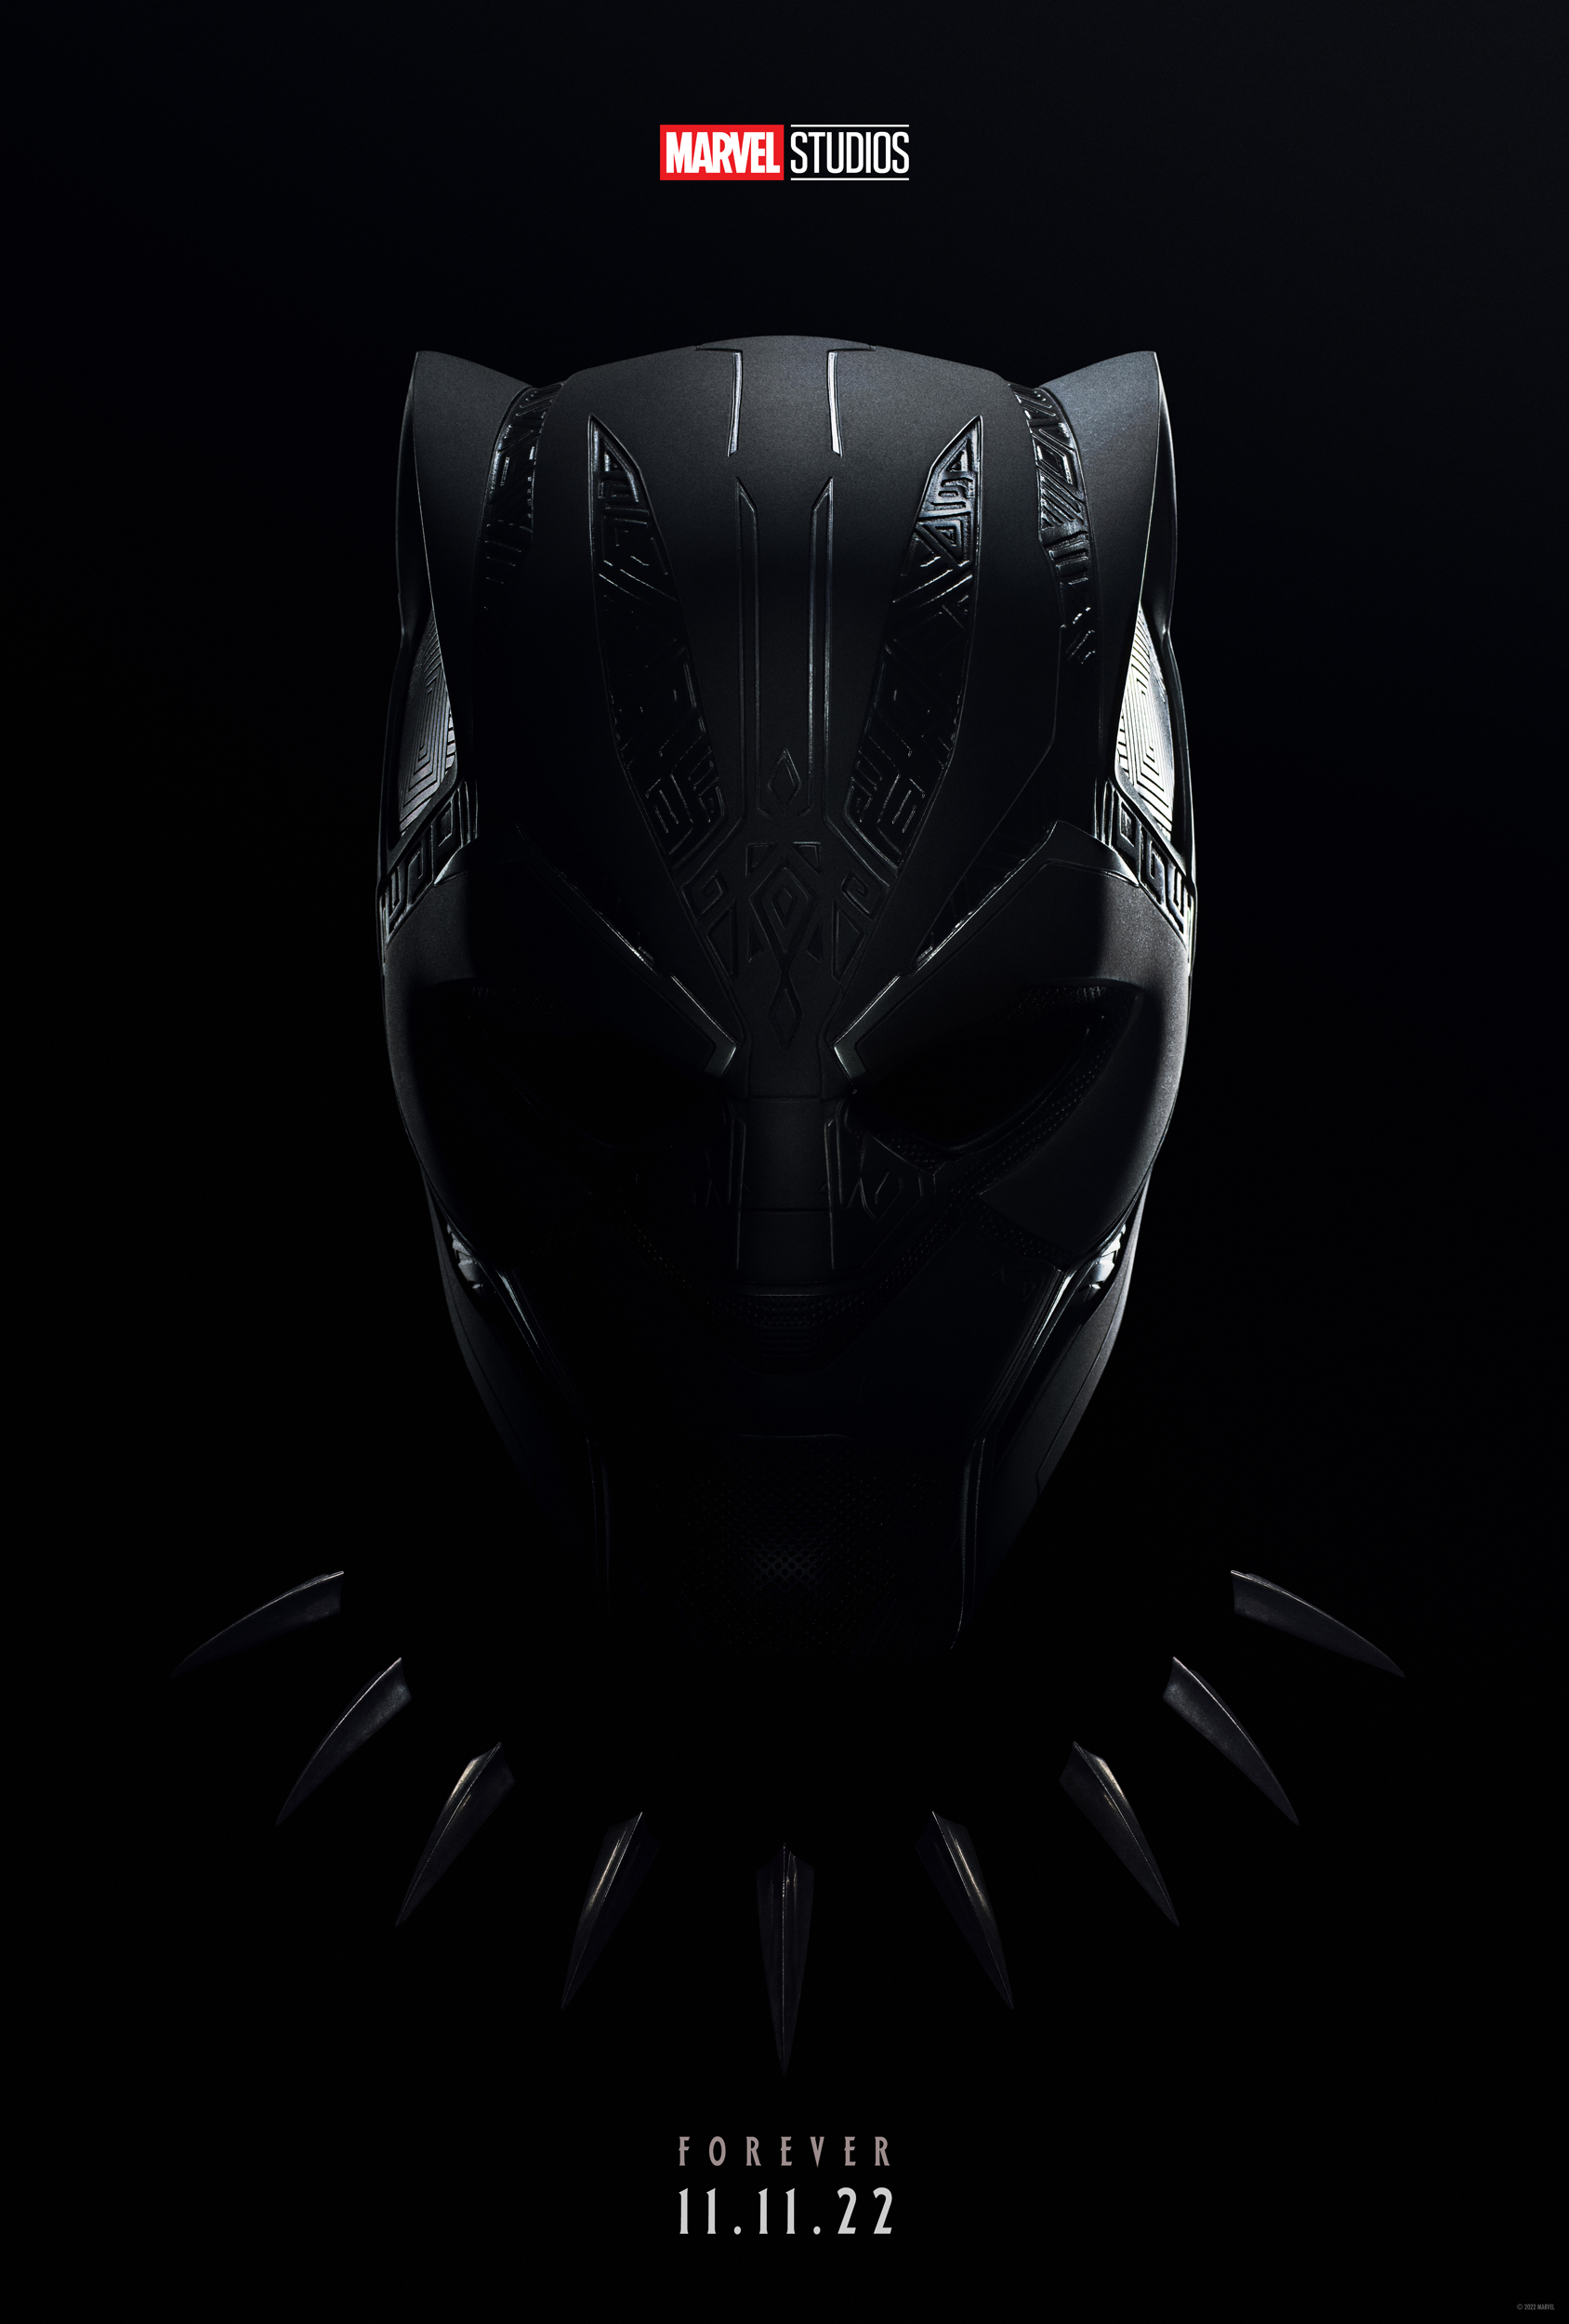 Black Panther 2 Comic-Con poster